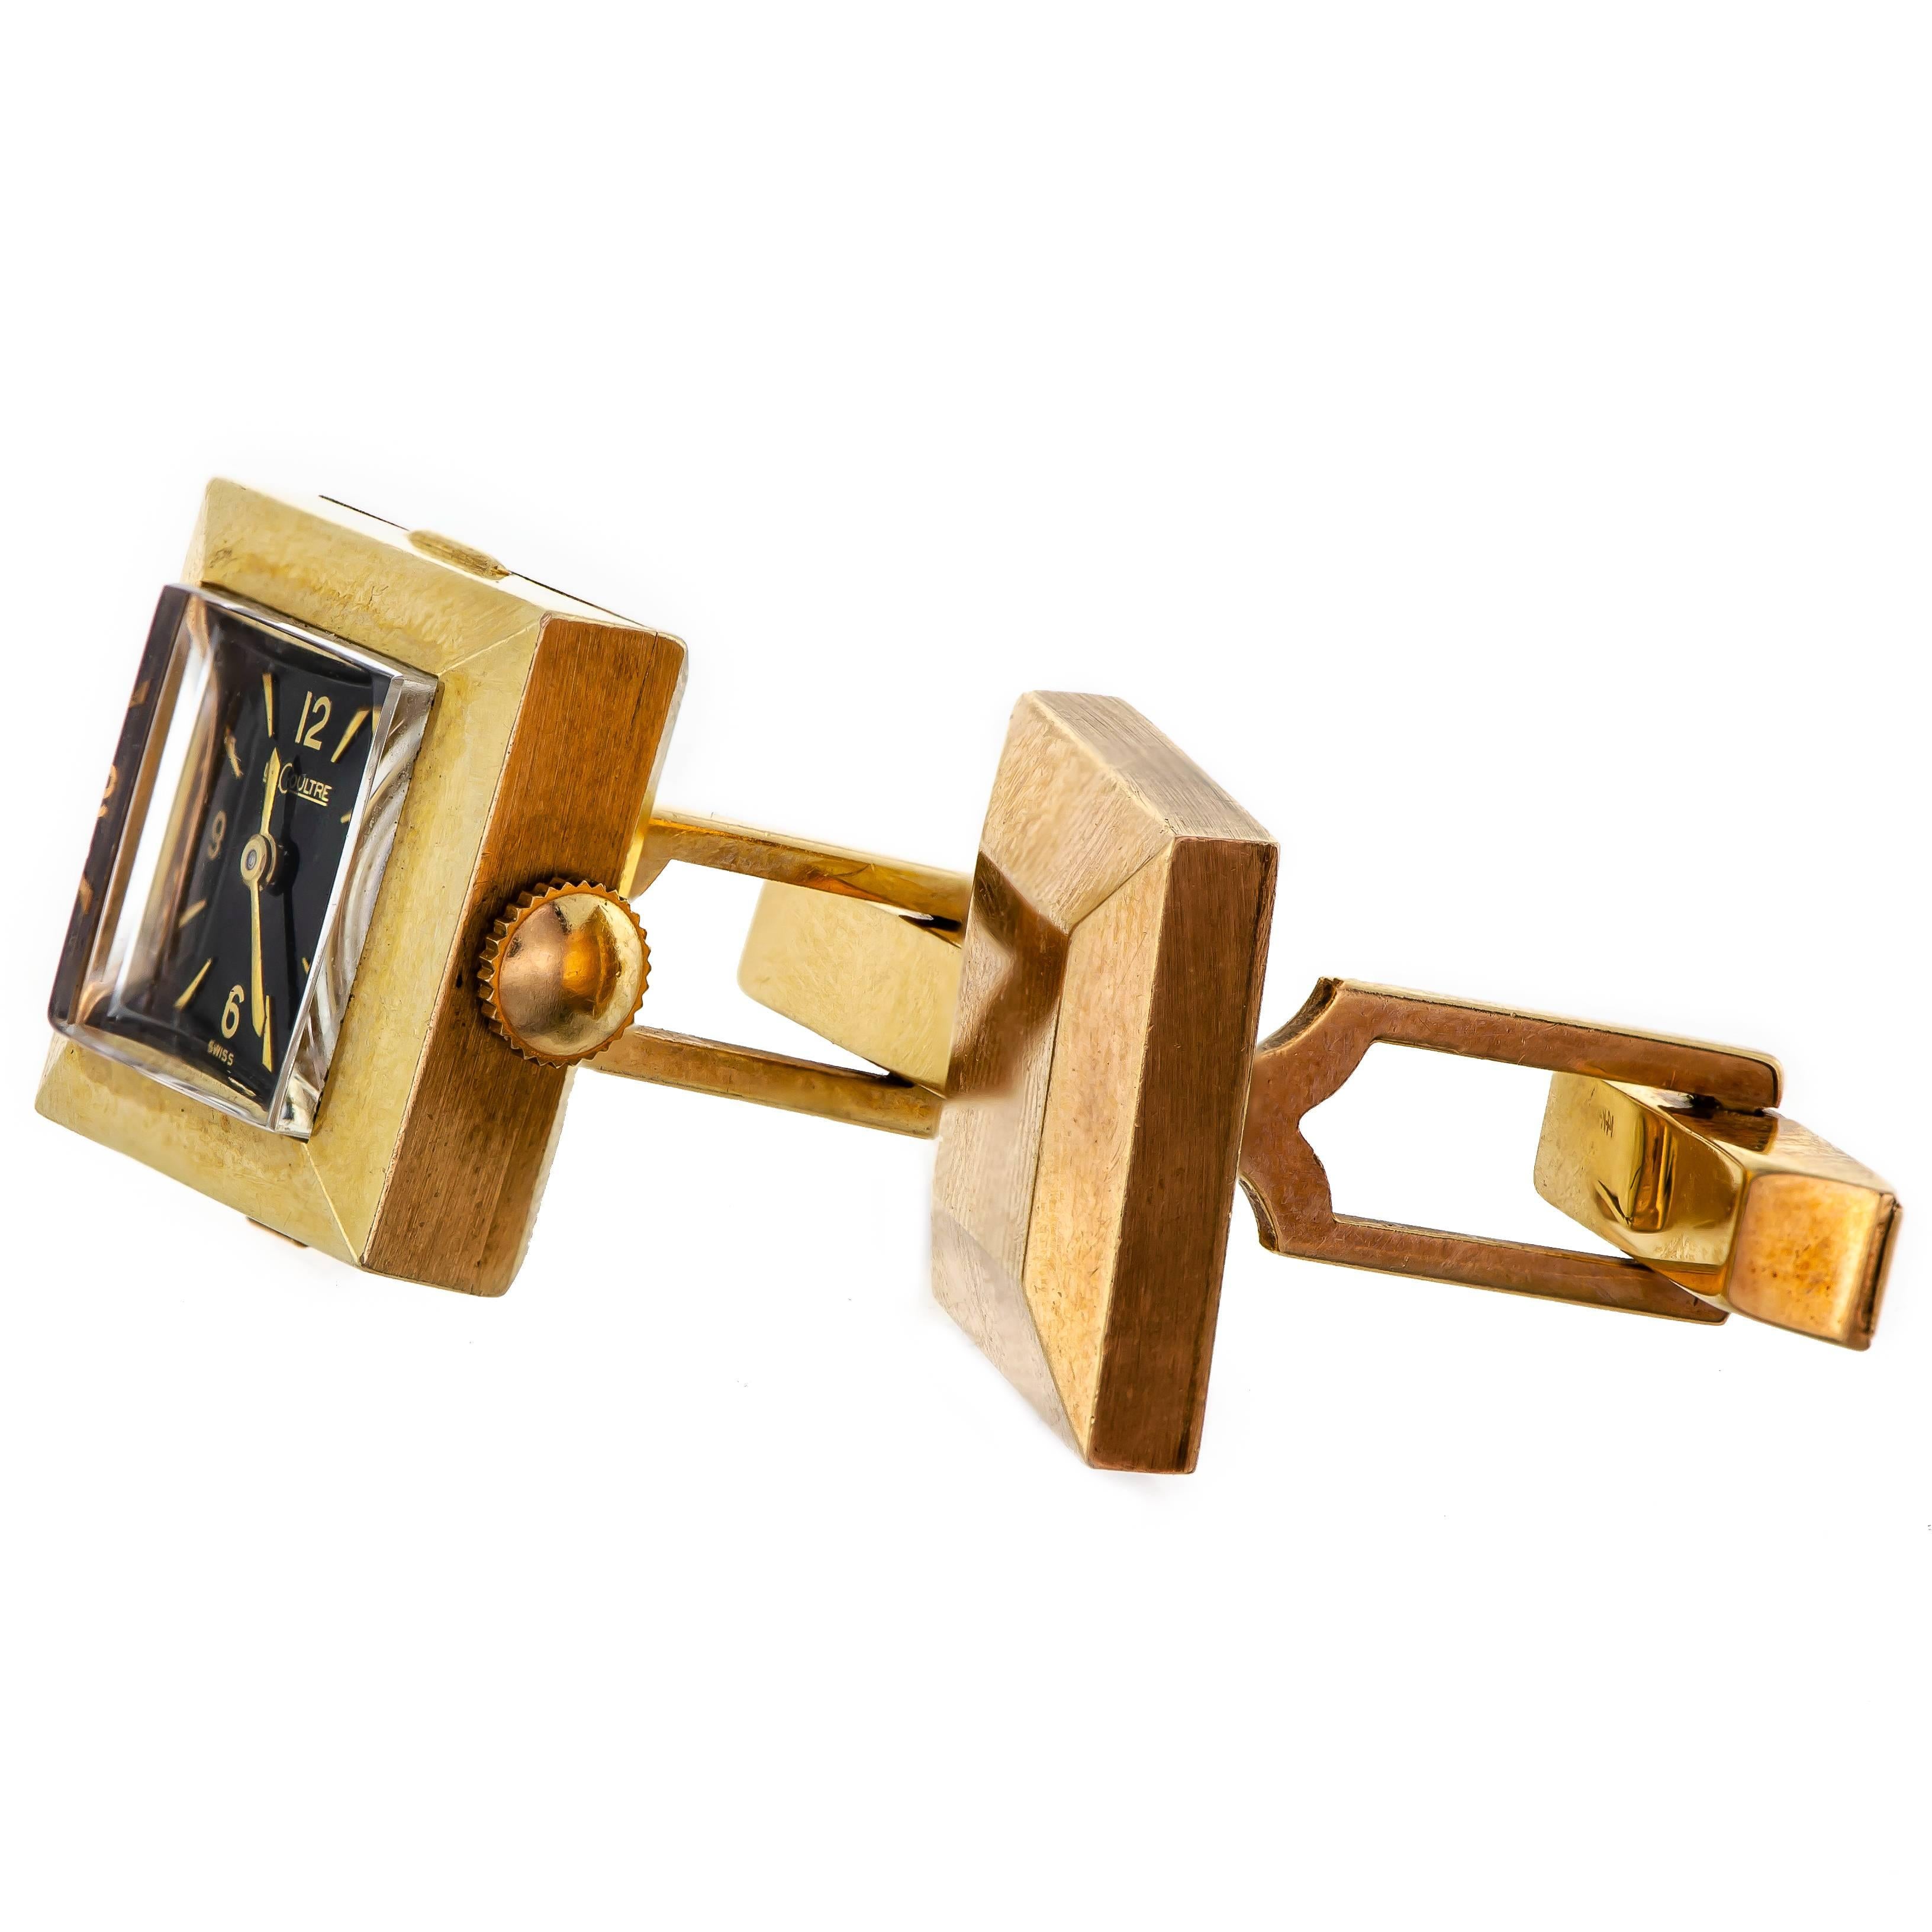 Wonderful Mid-Century 14K LeCoultre watch cufflinks - circa 1960 - pair - 14k yellow gold mid-century triple signed dial, case and movement LeCoultre watch cufflinks - designed as a solid 14k yellow gold facted square one set with a black dial watch